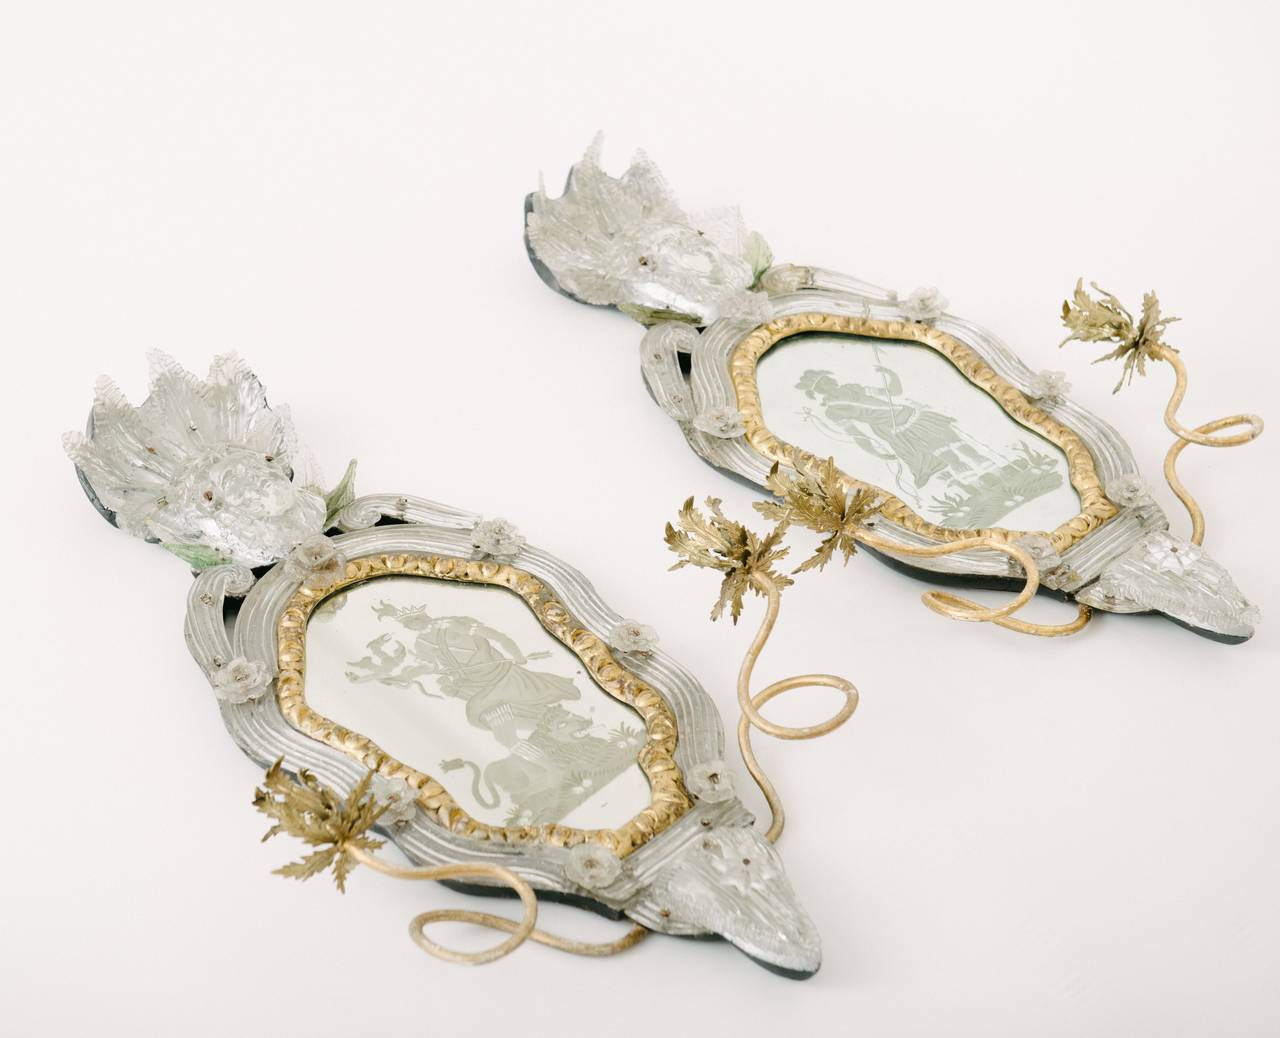 An exceptionally rare pair of 18th century Venetian etched mirror wall sconces. Each sconce features handblown glass to include extruded scrolls, flowers and an amazing monumental three-dimensional face under a crown of leaves. The etched mirrors